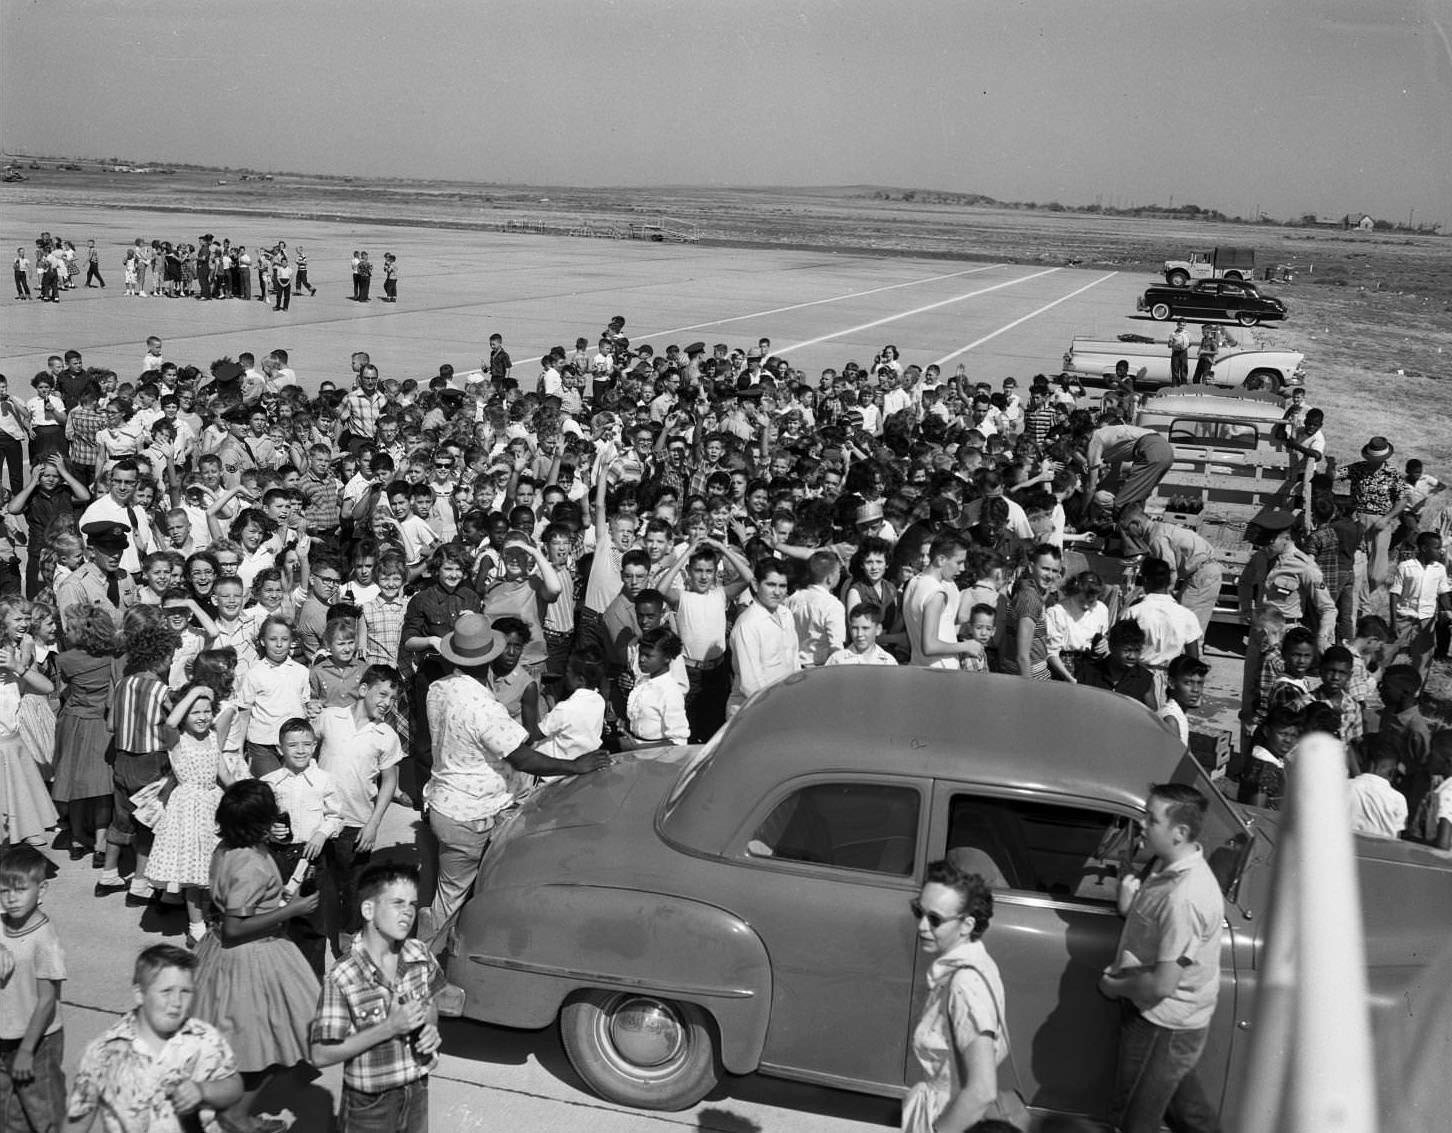 A large crowd men, women and children standing on a runway at the Dyess Air Show in Abilene, Texas, 1955